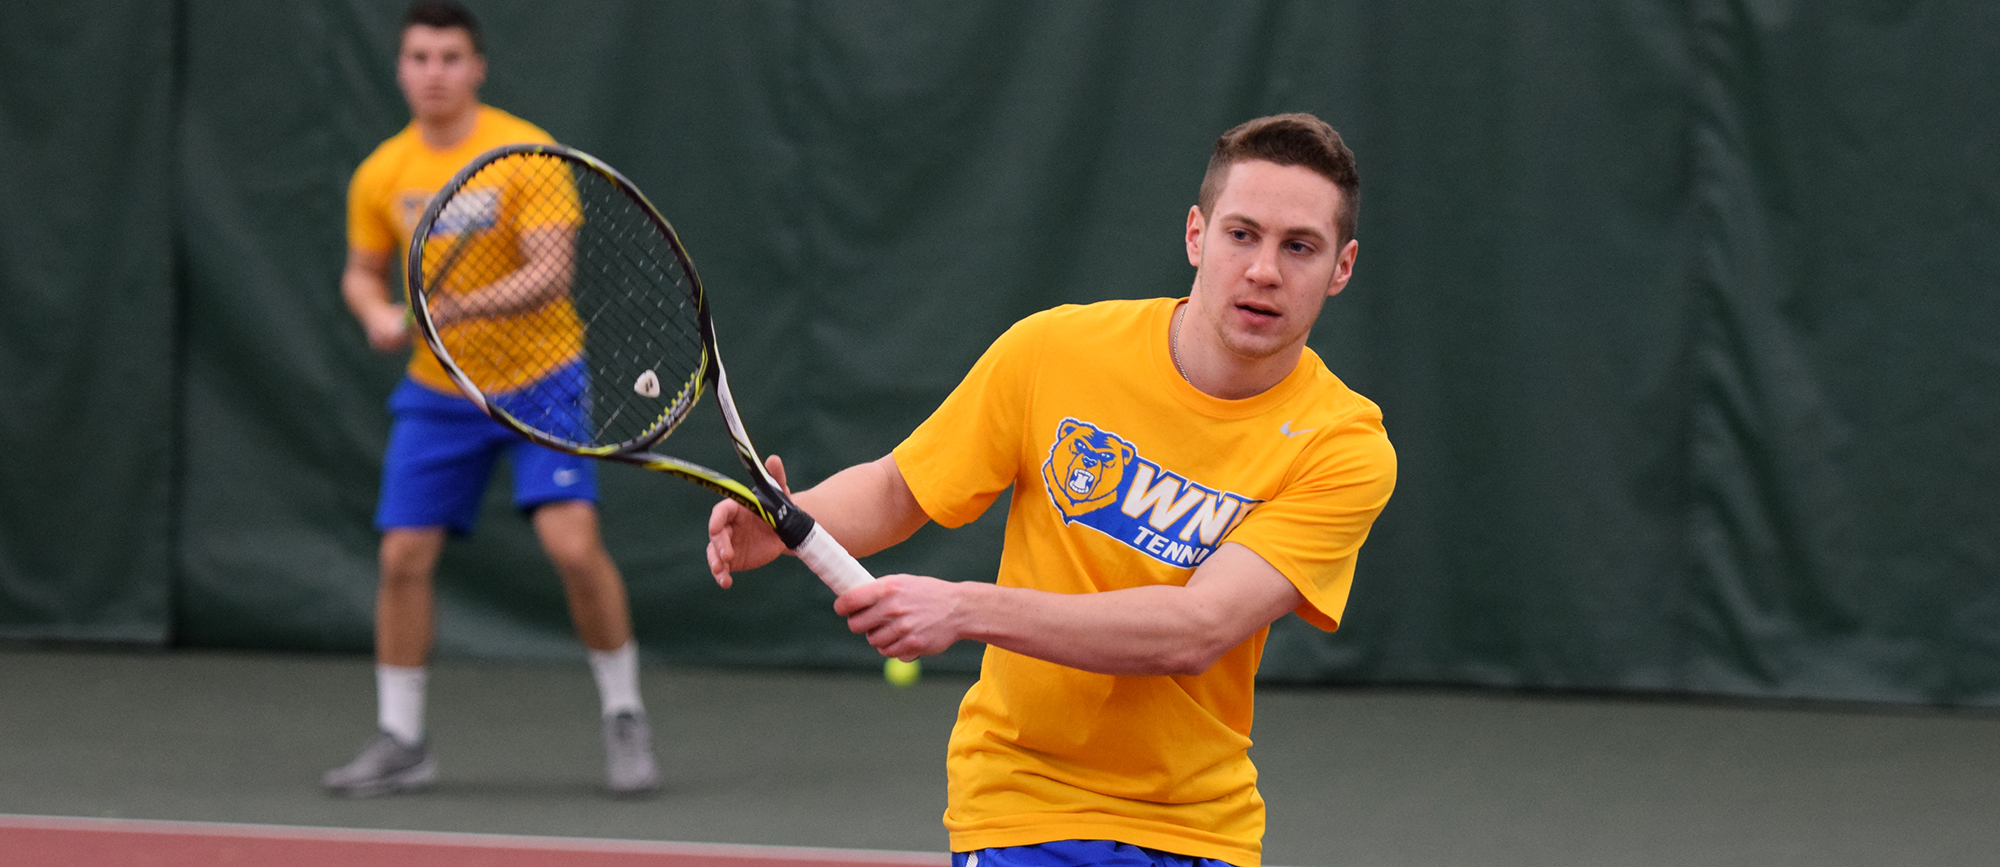 Western New England's No. 1 doubles duo of Justin Kohut and David Kalmer posted an 8-3 win against Roger Williams on Saturday. (Photo by Rachael Margossian)